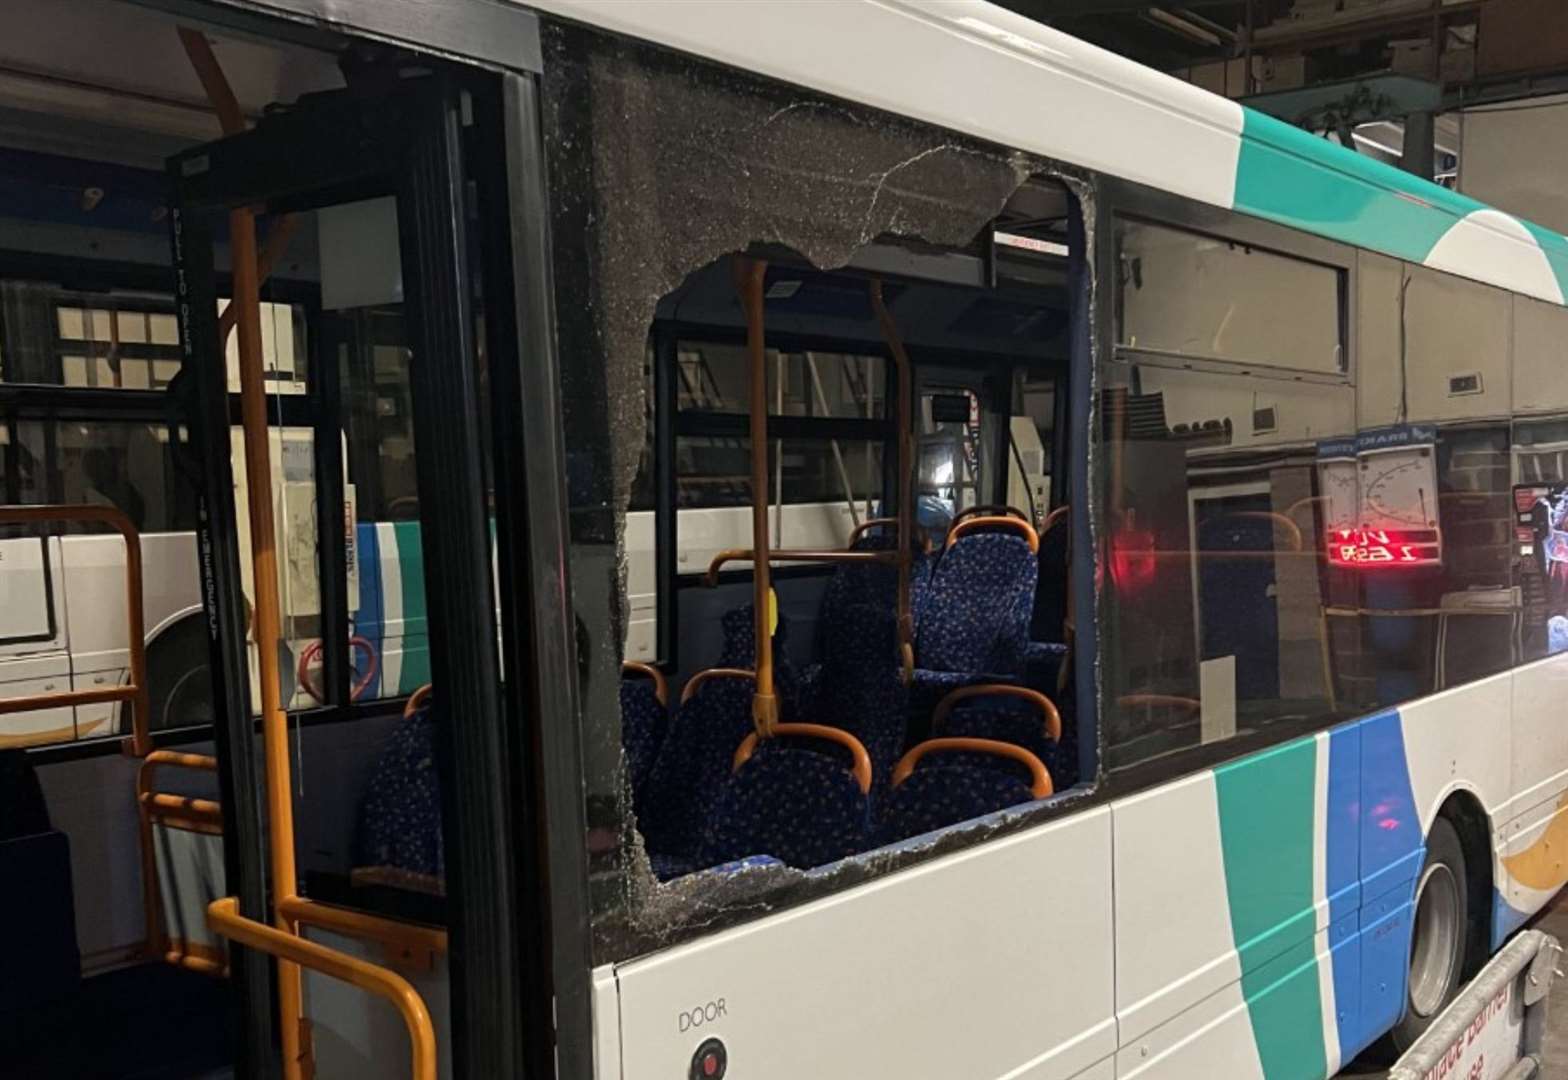 The damage done to one Stagecoach bus in the Trinity Road are of Ashford. Photo: Stagecoach